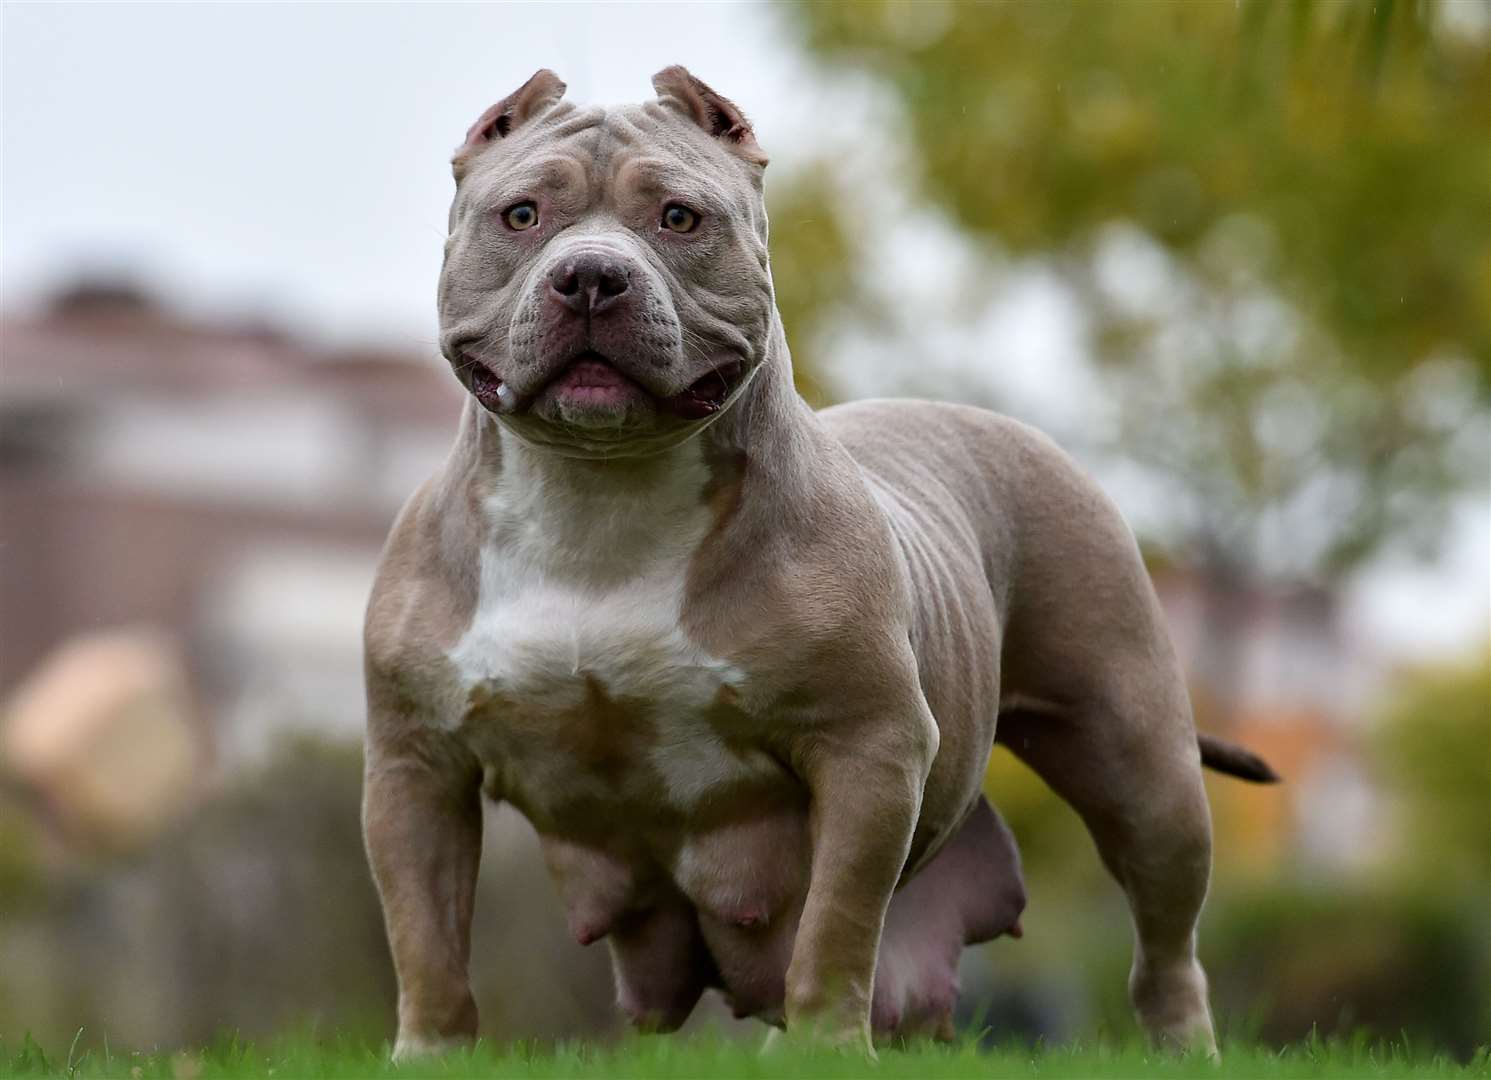 The Bully Watch group says the breed’s genetics are rooted in a banned Pitbull. Image: iStock.